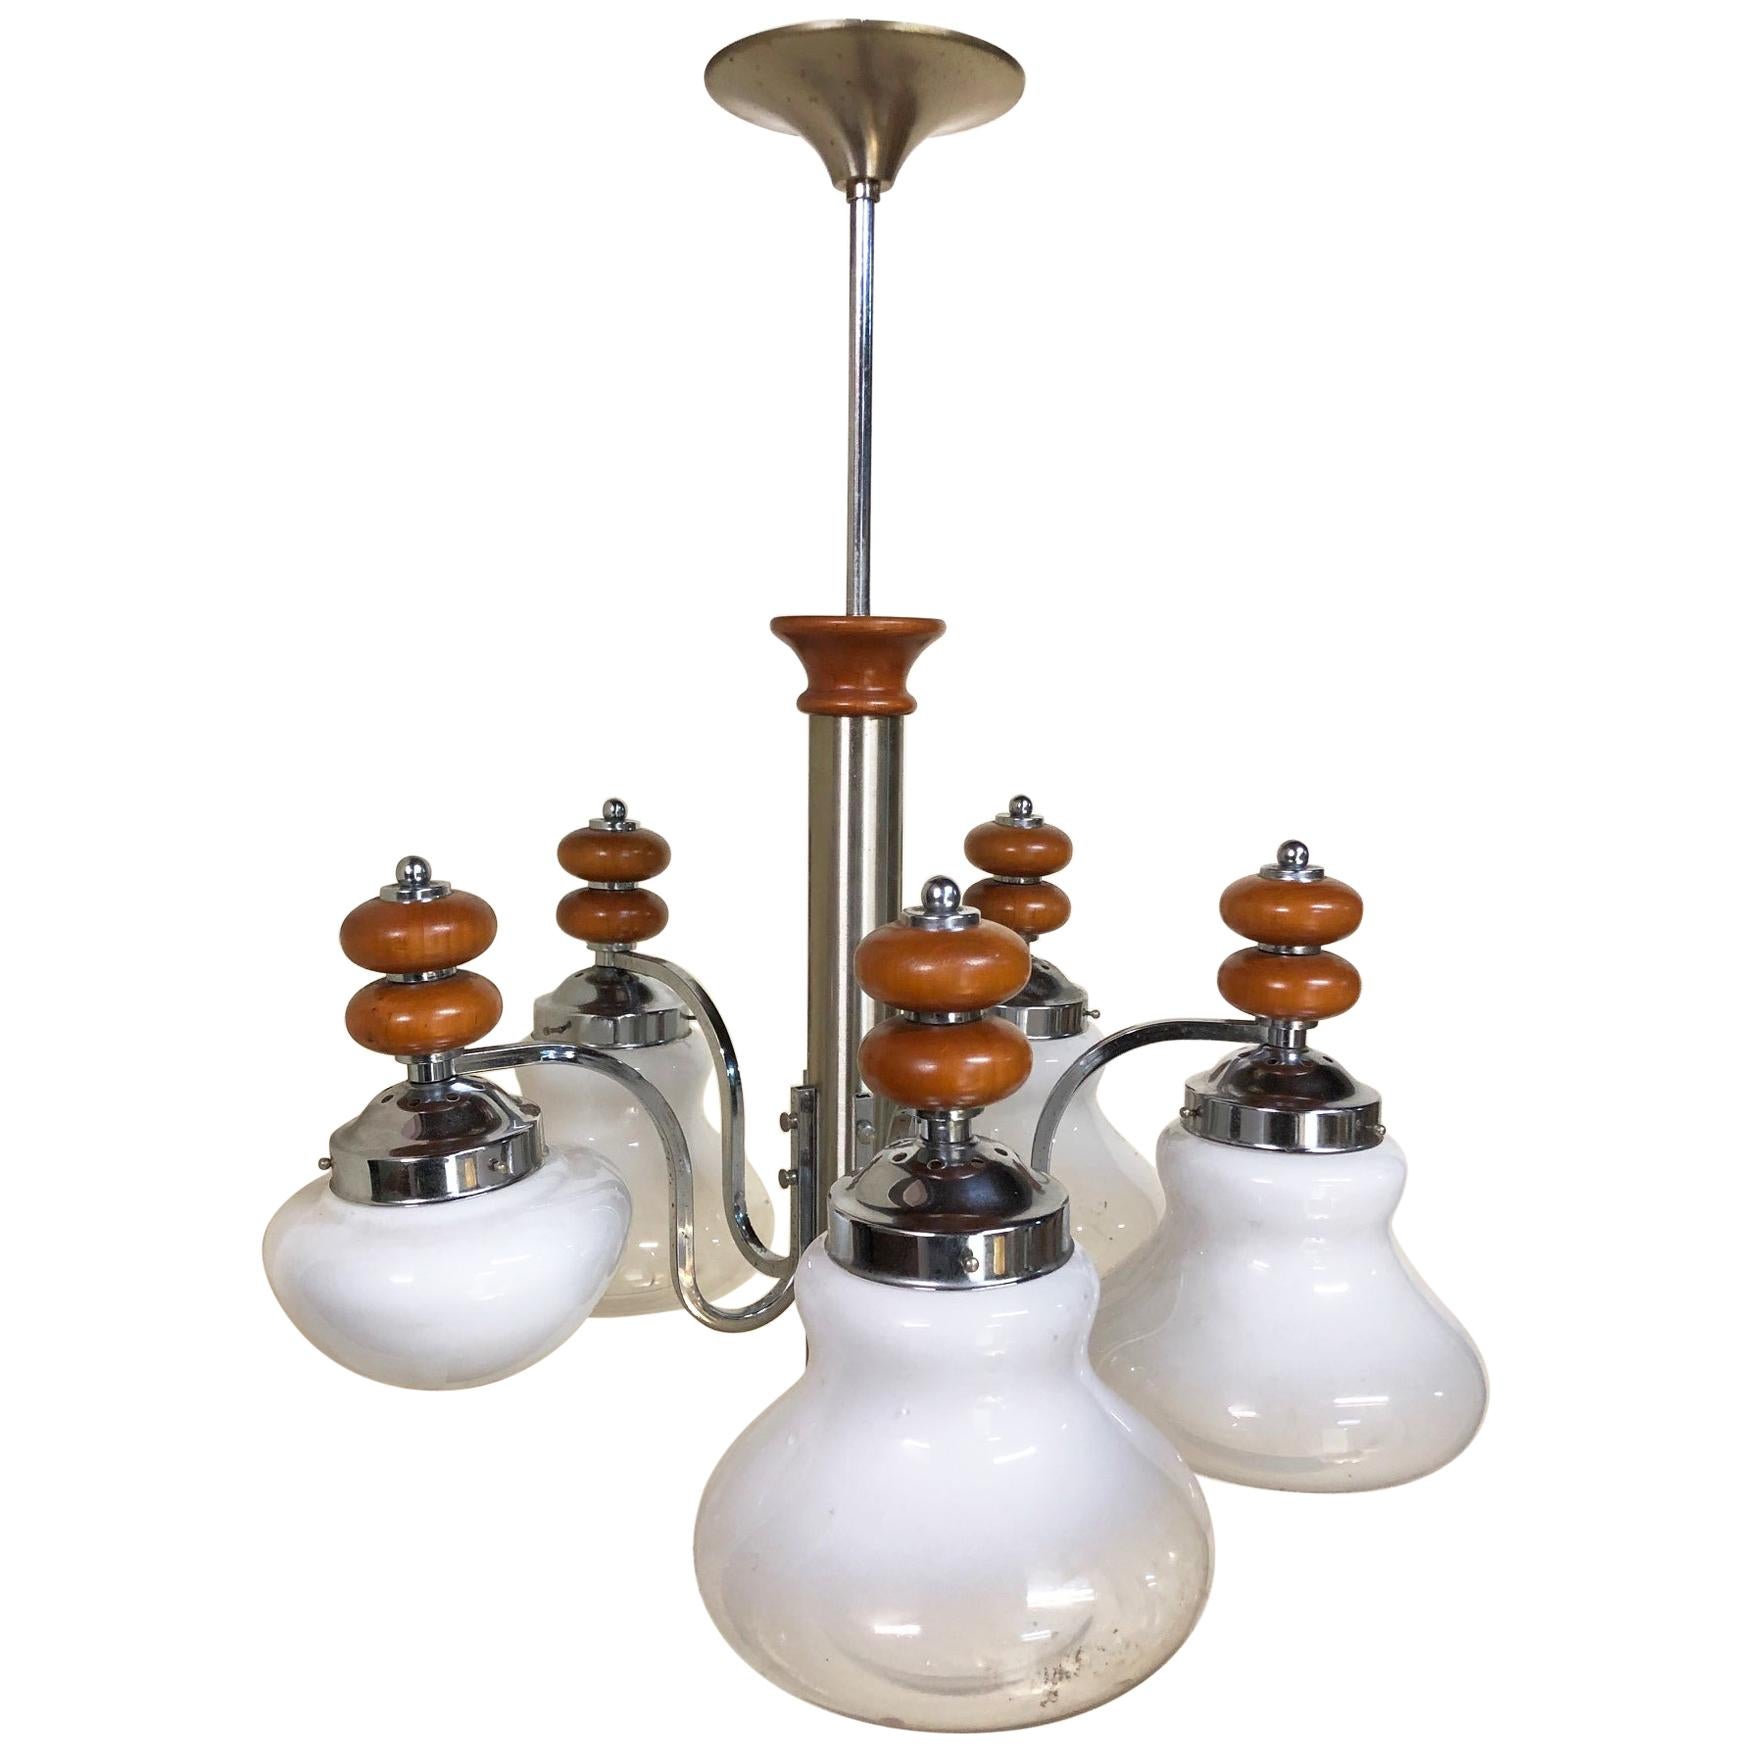 Original Italian Five-Light Chandelier from 1970 Chrome, Wood and Glass For Sale